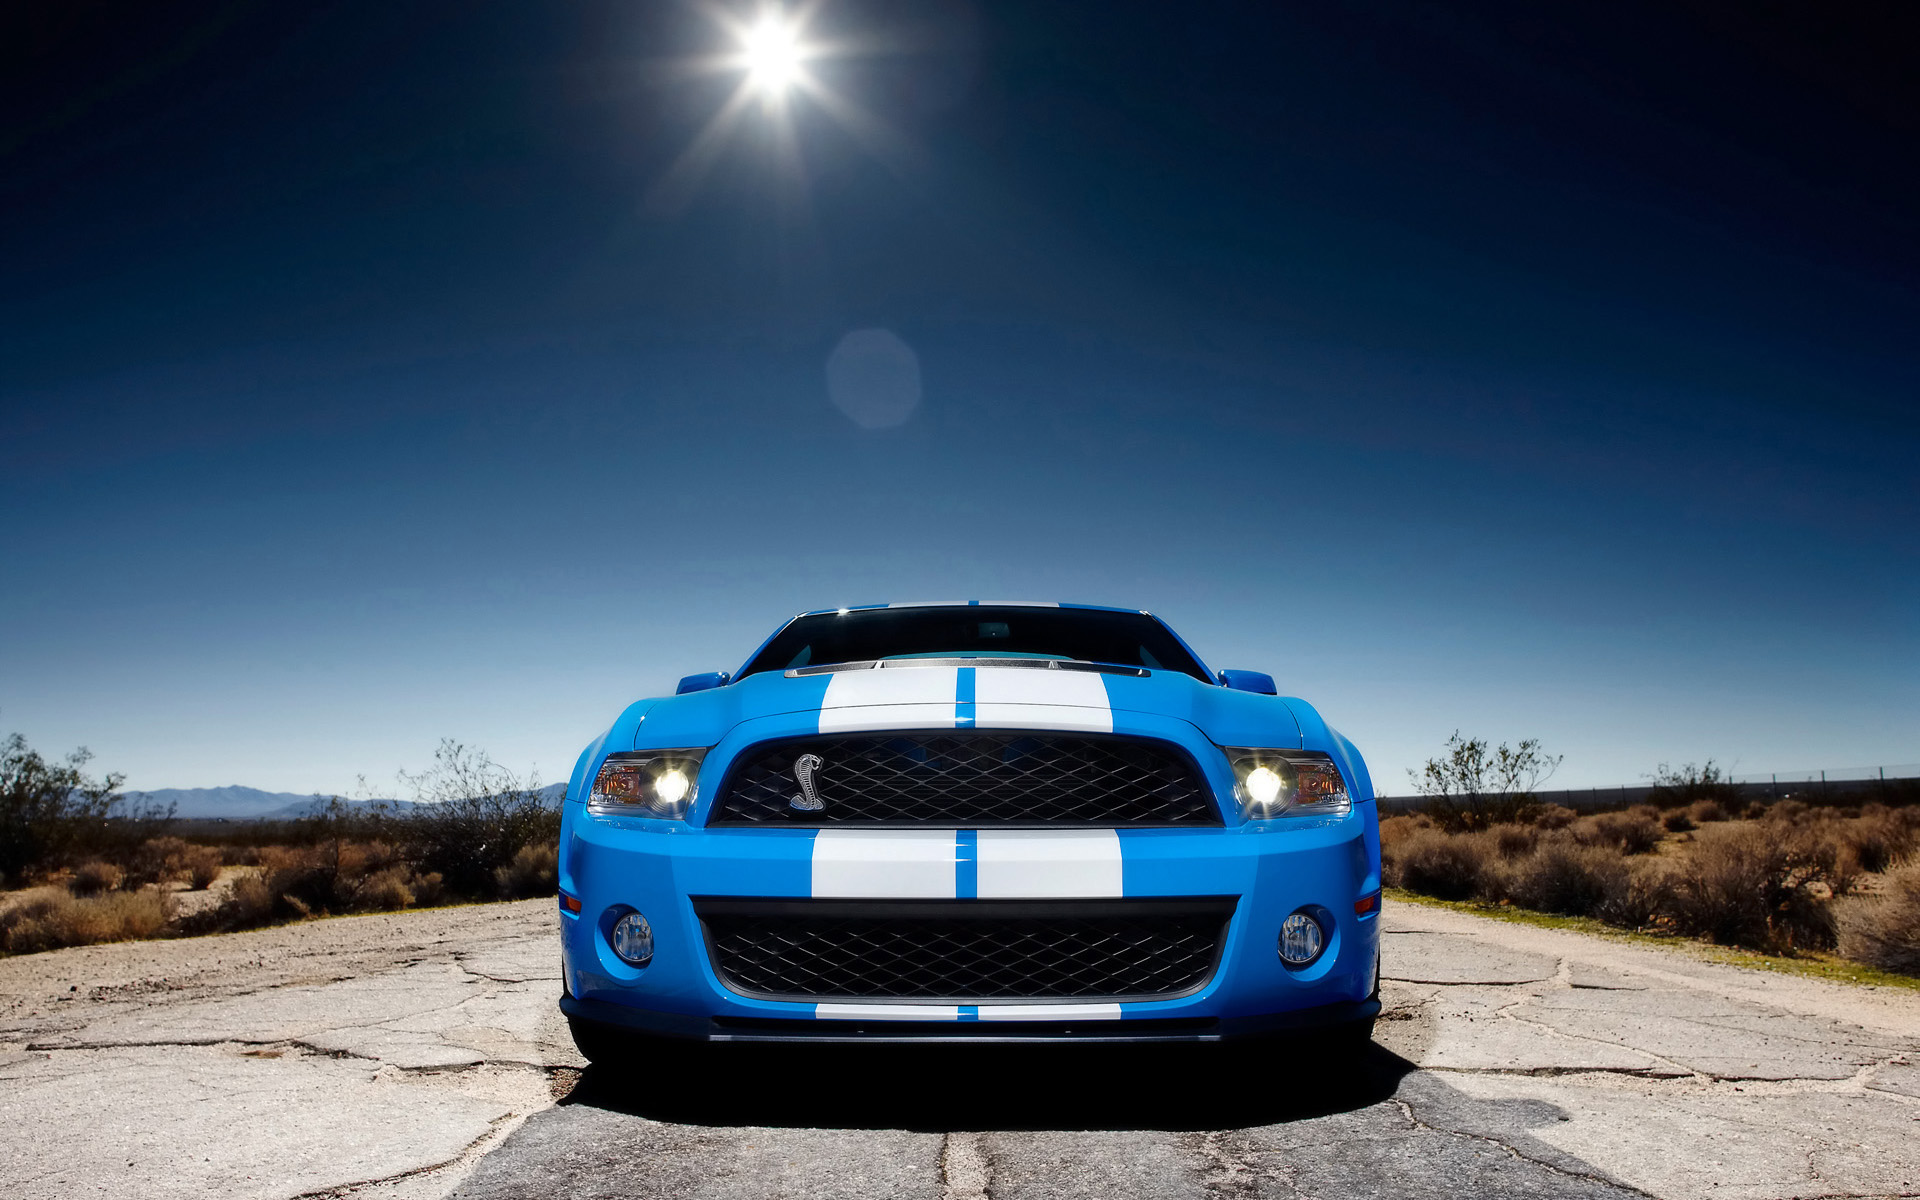  2010 Ford Shelby Mustang GT500 Wallpaper.